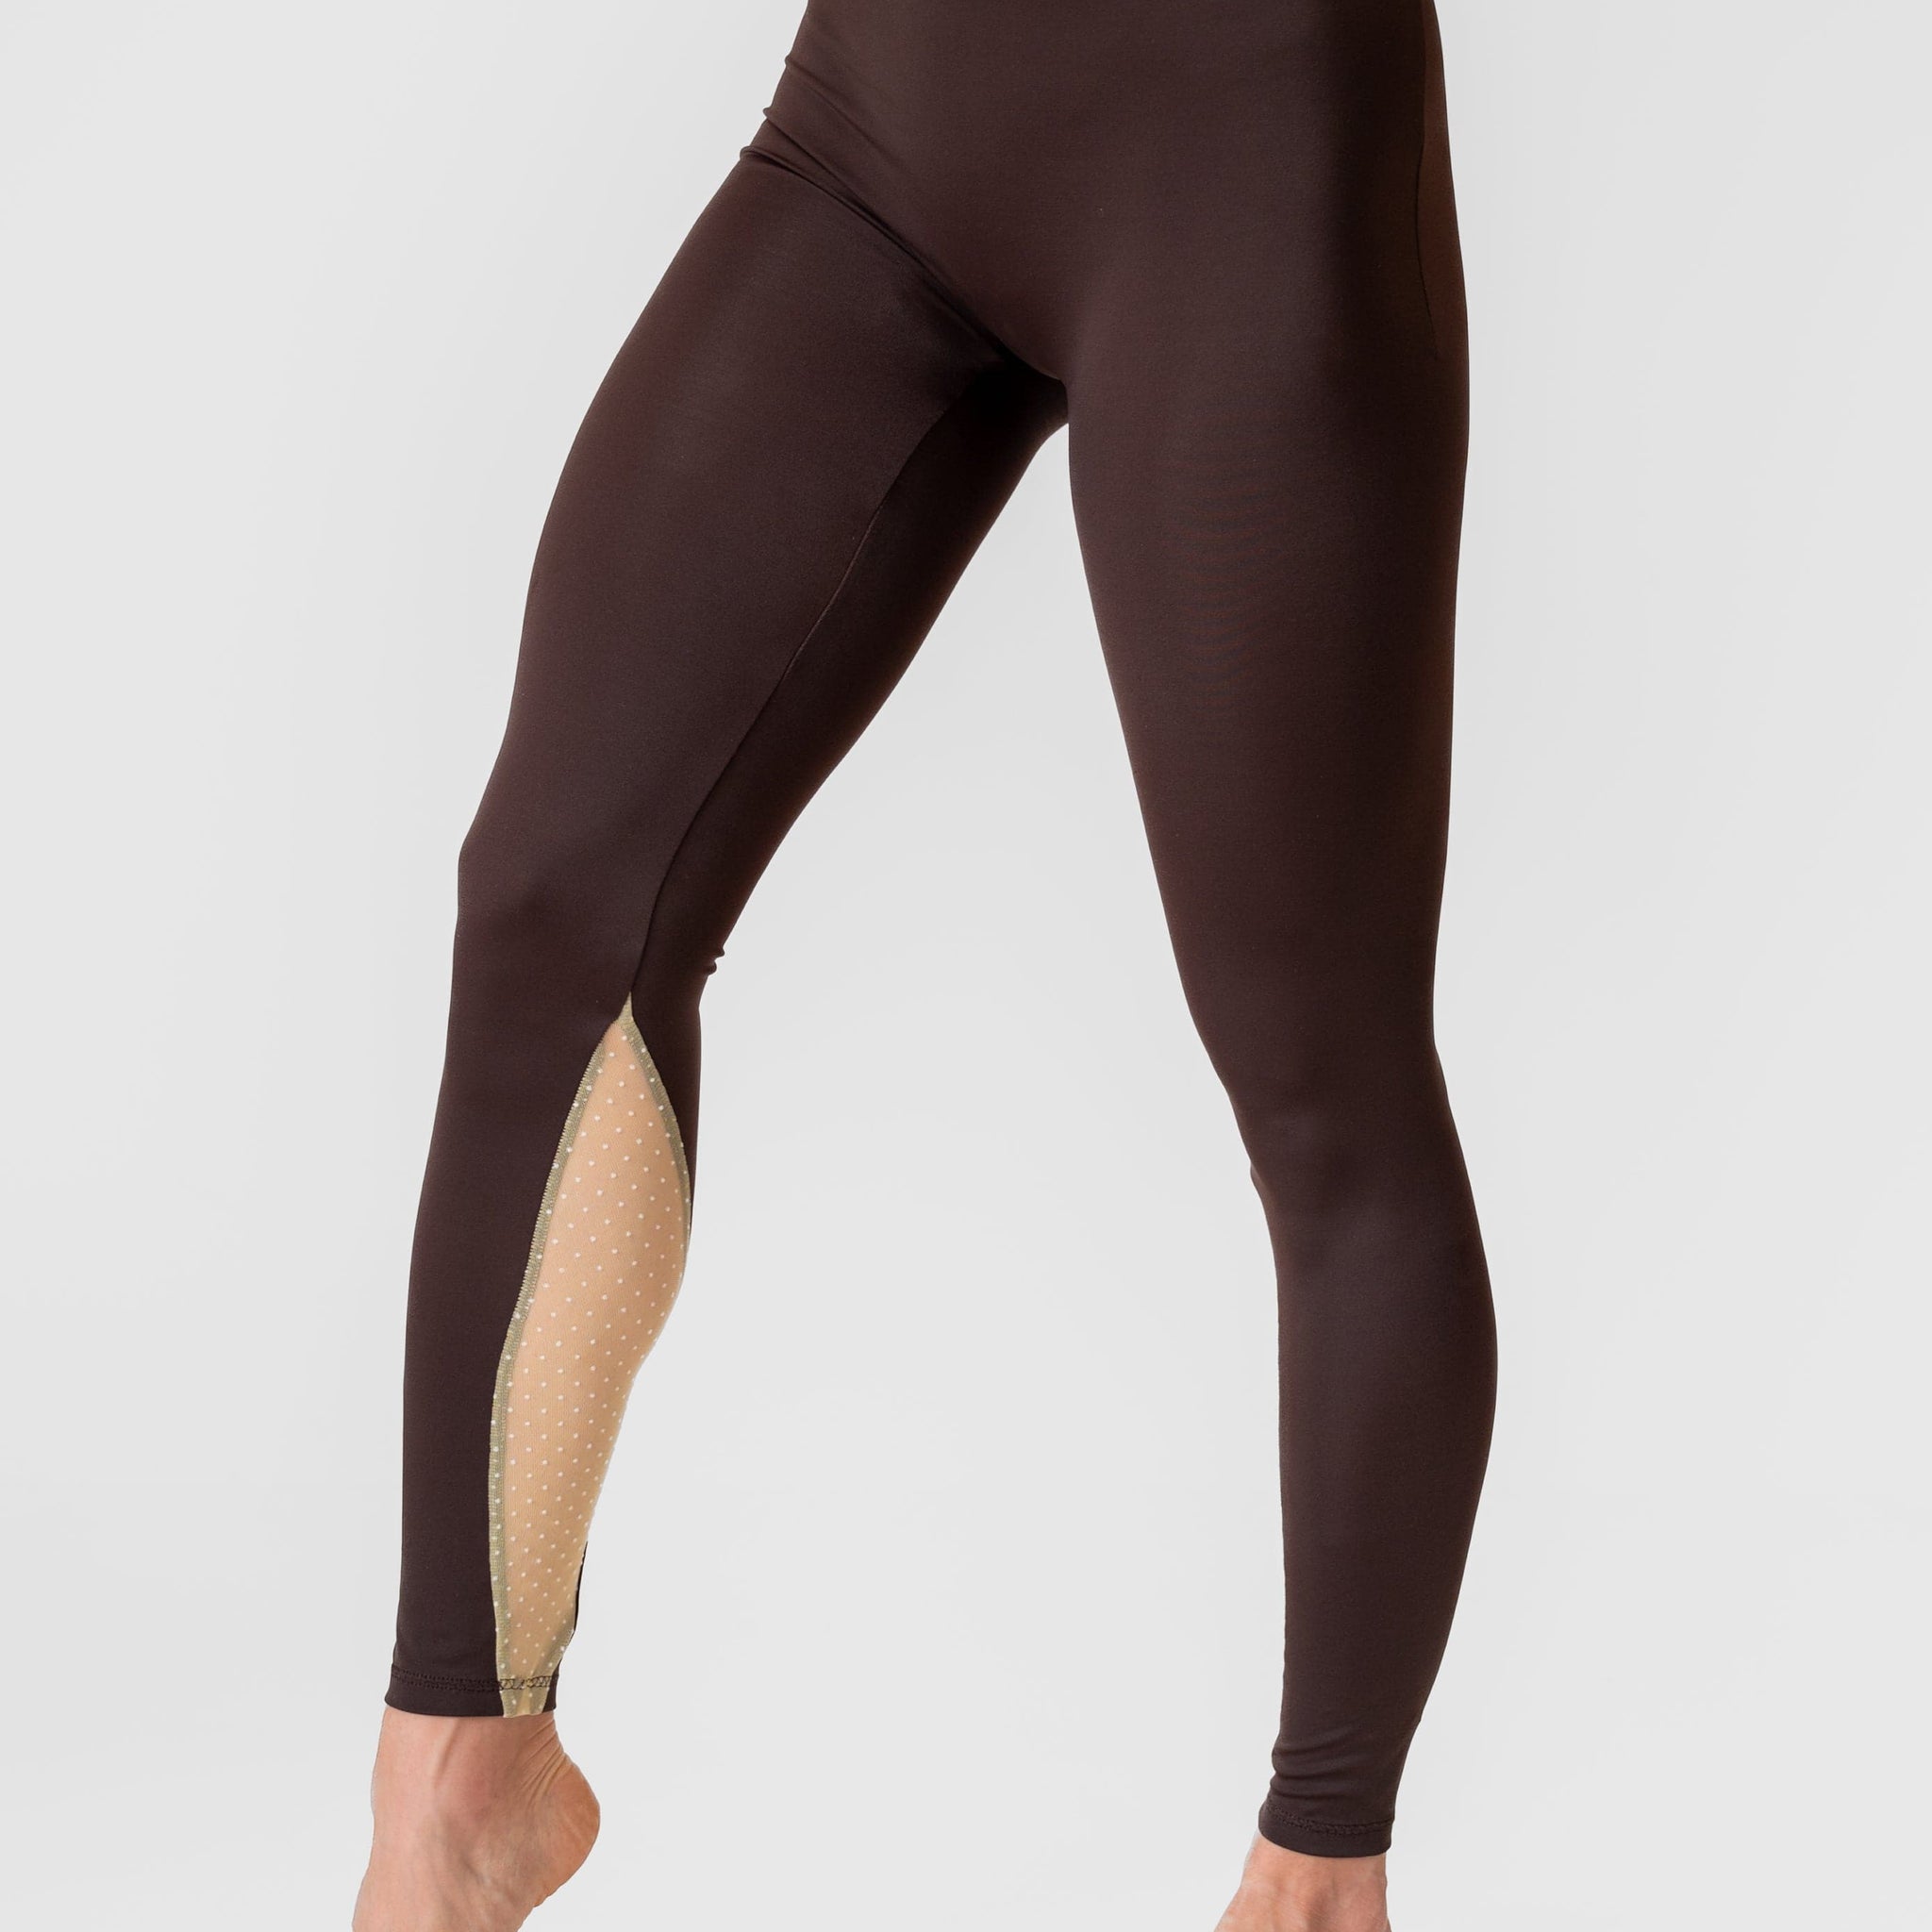 Women's Brown 7/8 Leggings for Yoga and Fitness Workouts by LENA Activewear